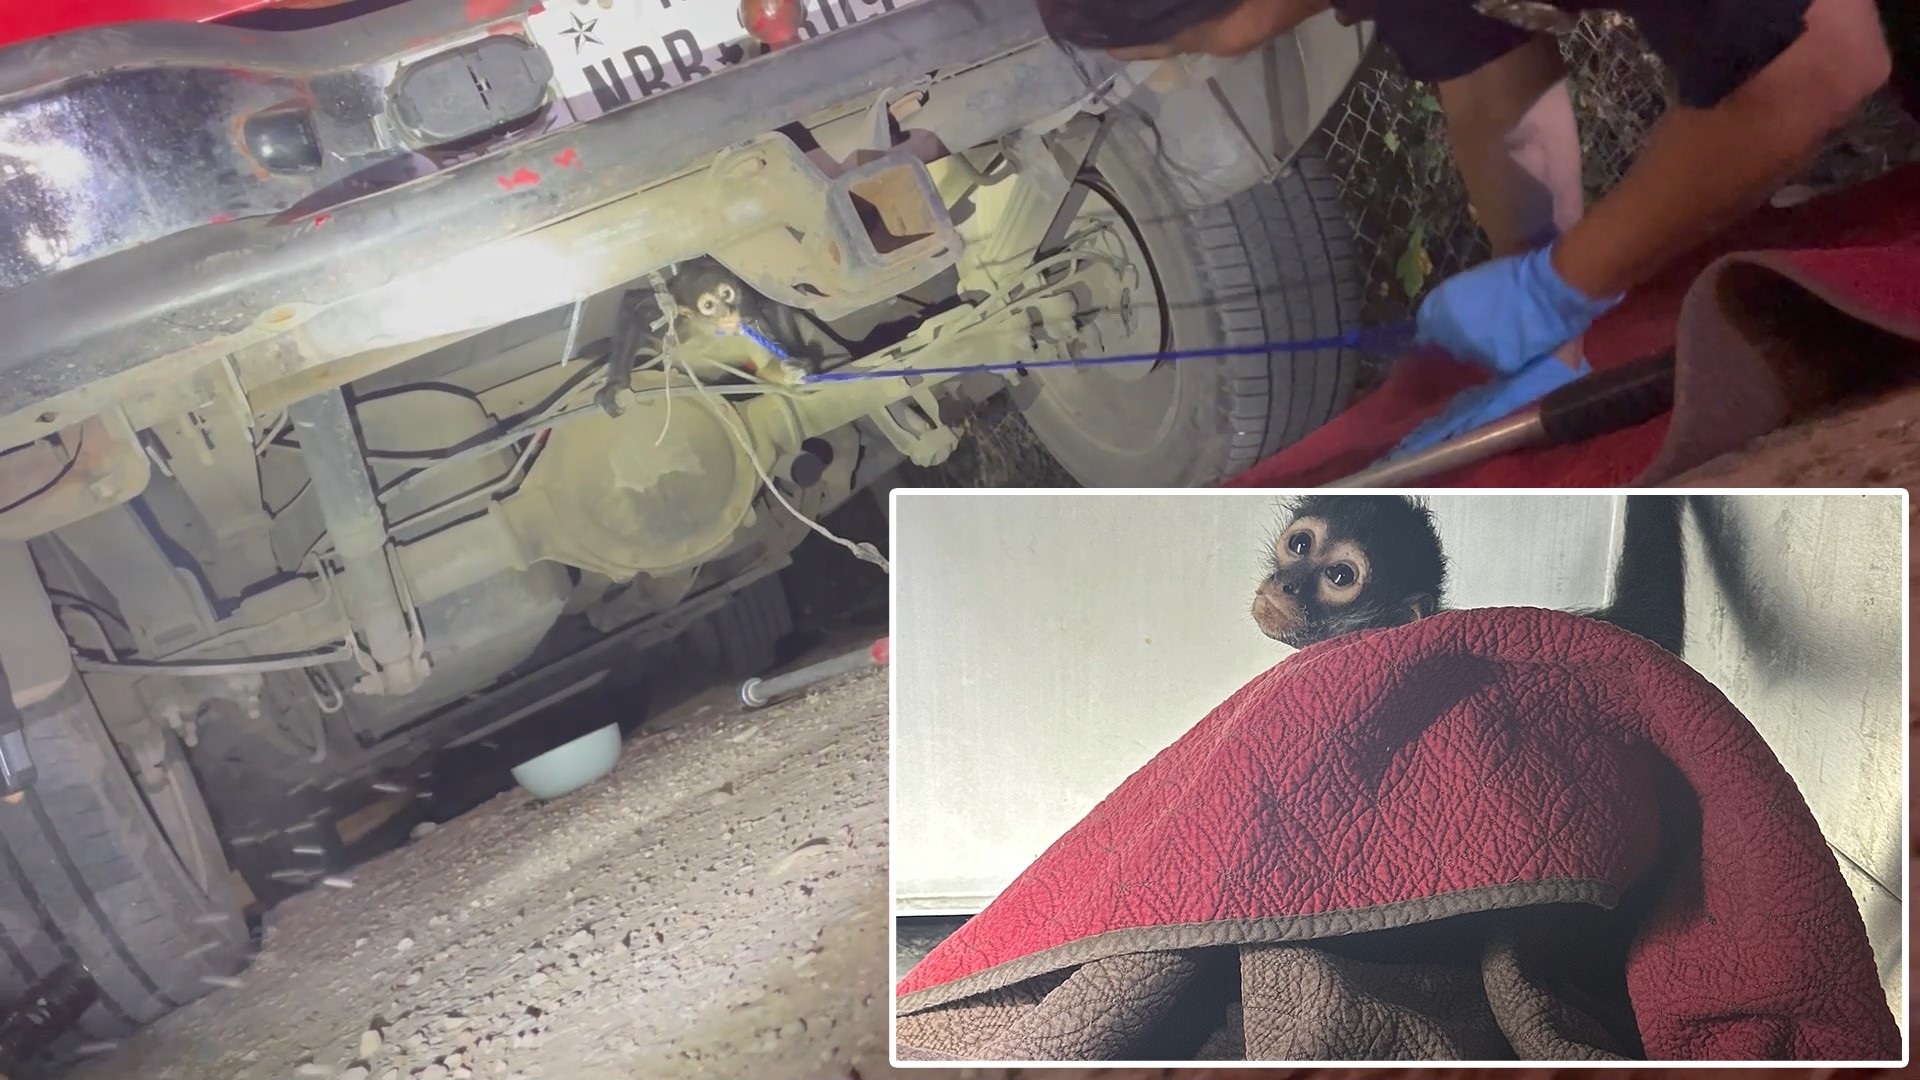 Houston police said the monkey was initially feisty with them, which led them to call in the experts.